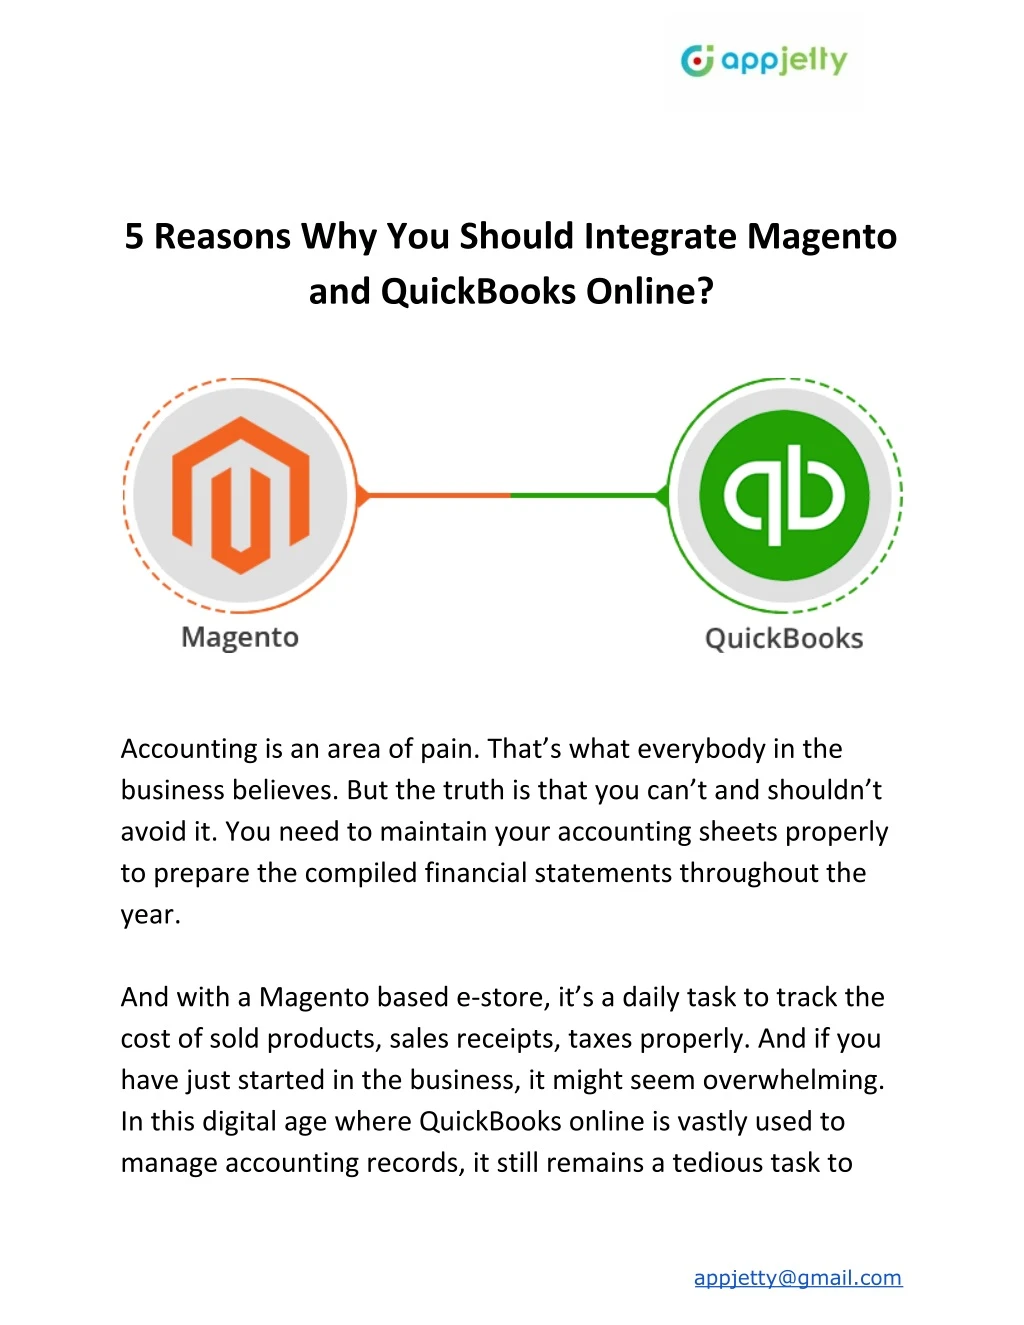 5 reasons why you should integrate magento